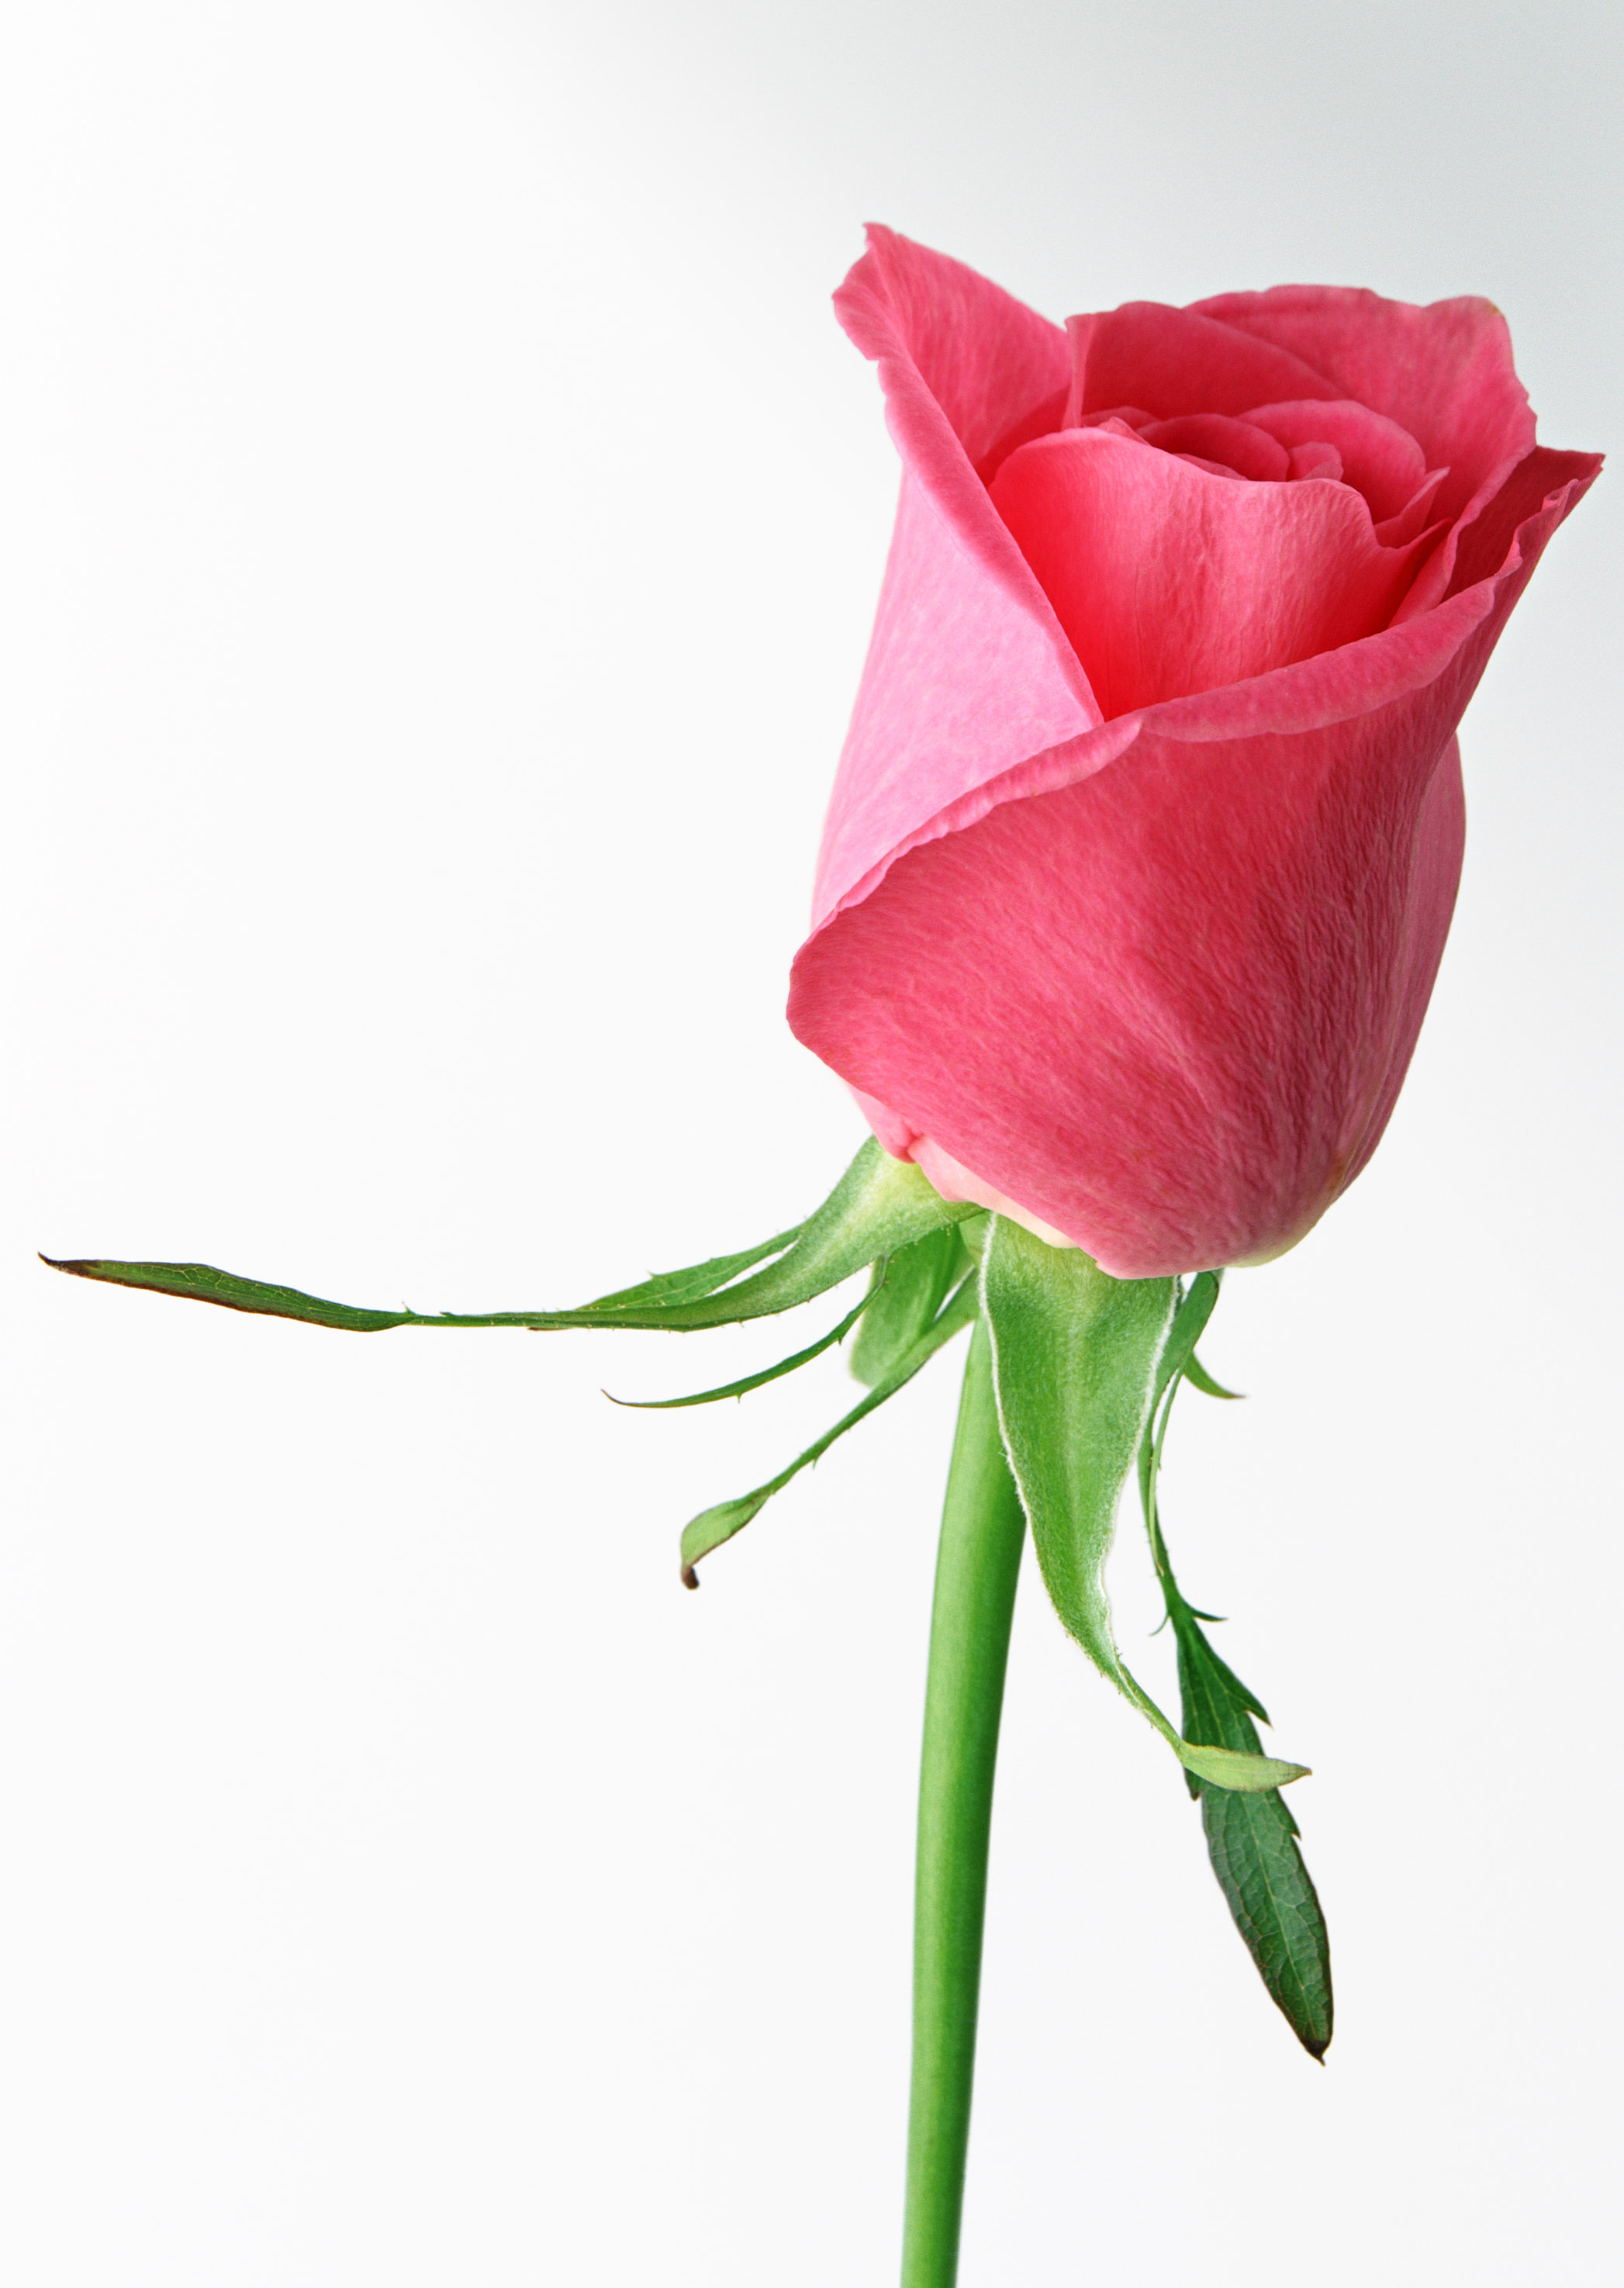 Rose Animated Flowers Picture Comment - ClipArt Best - ClipArt Best